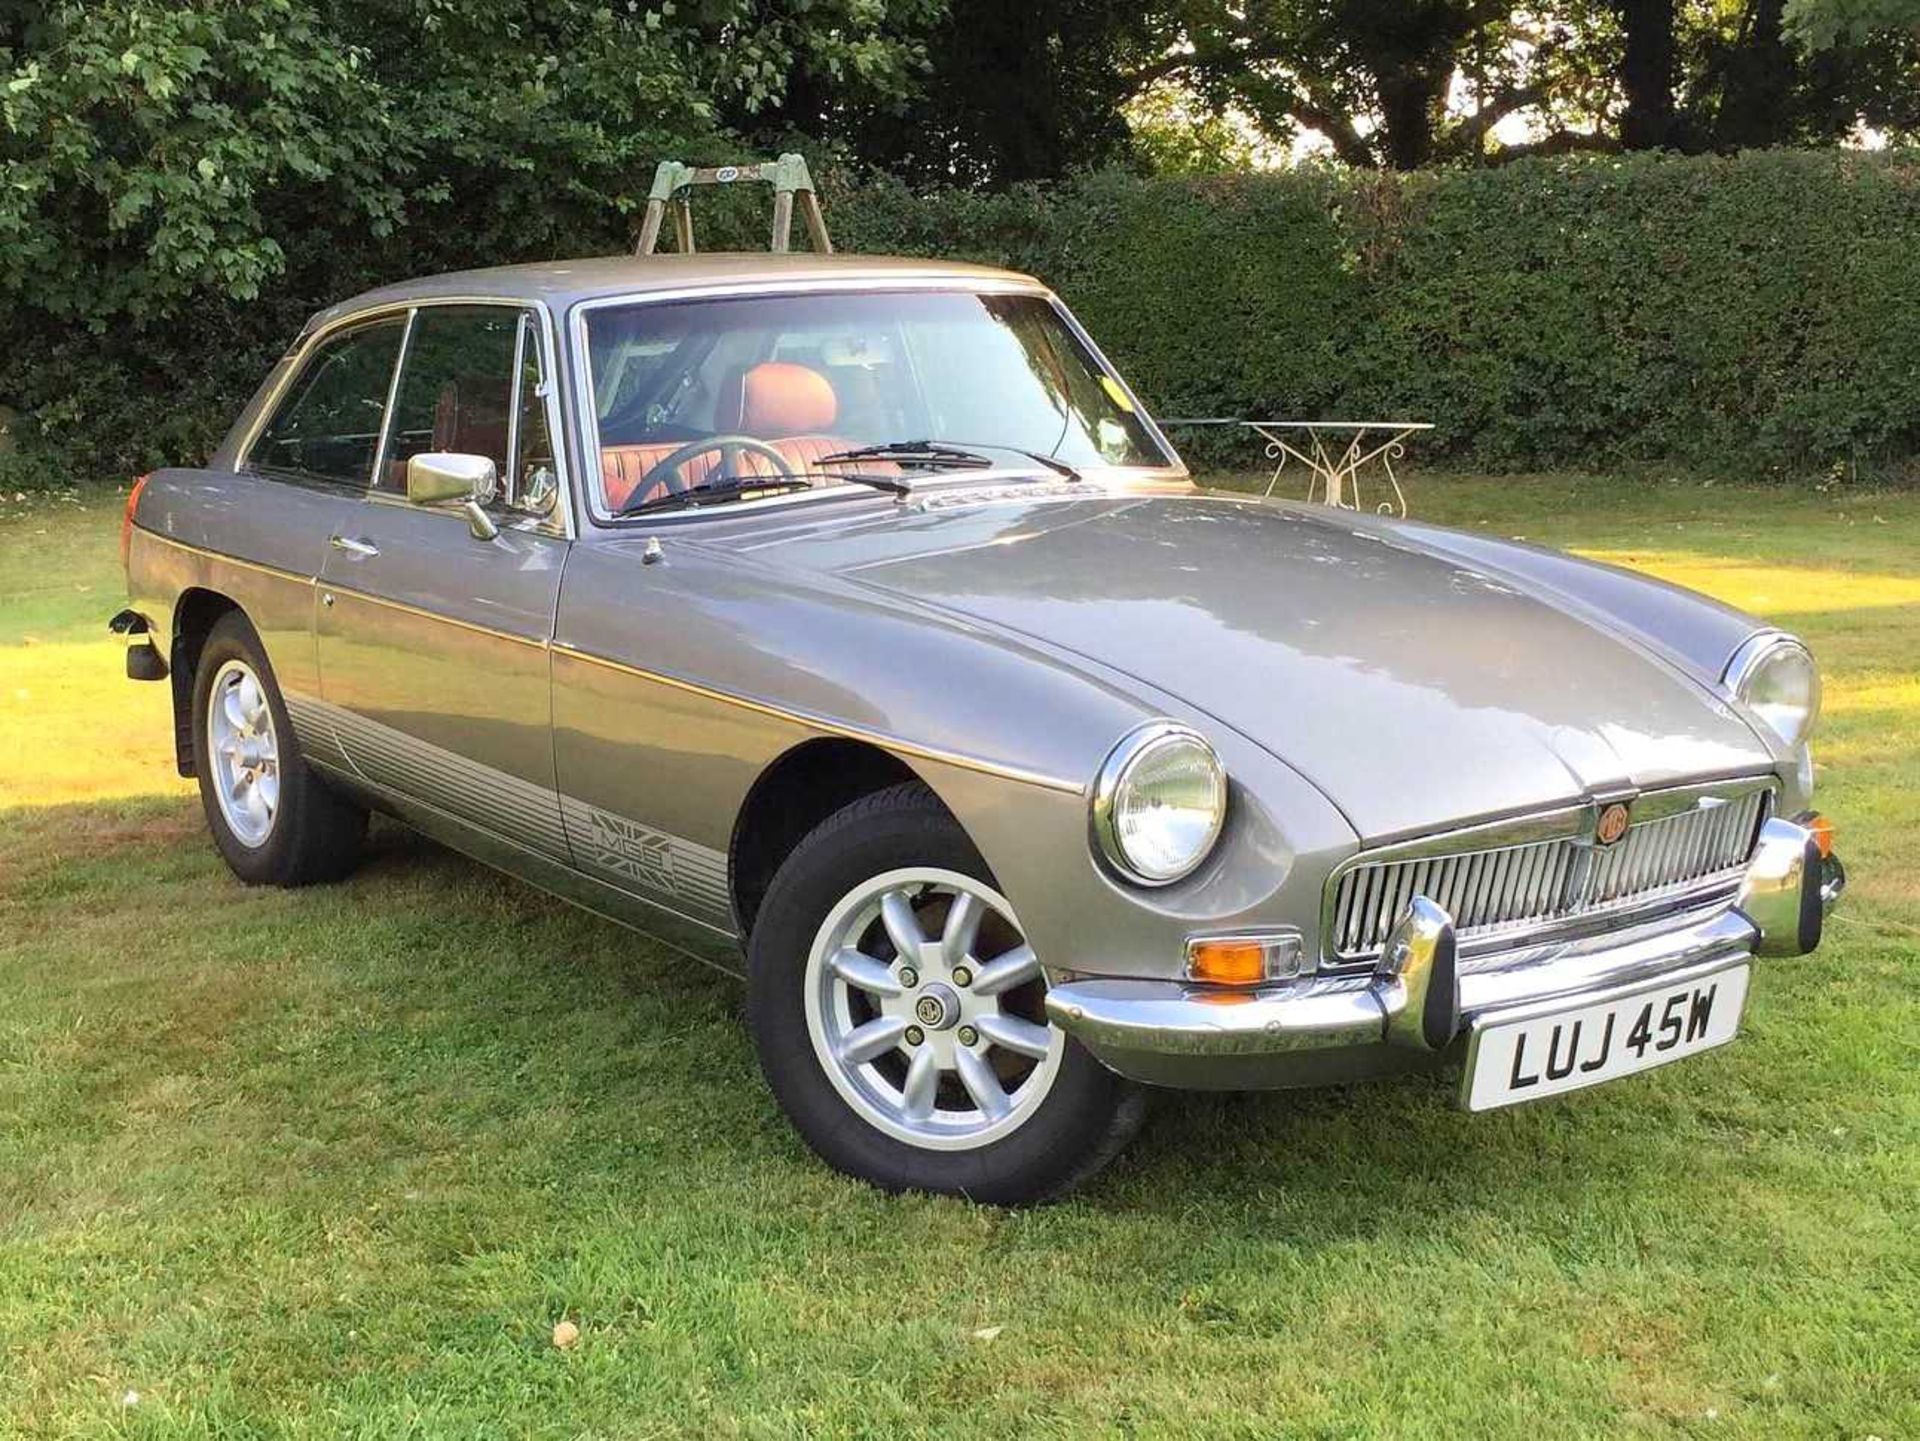 1981 MGB GT Restored to chrome bumper specification